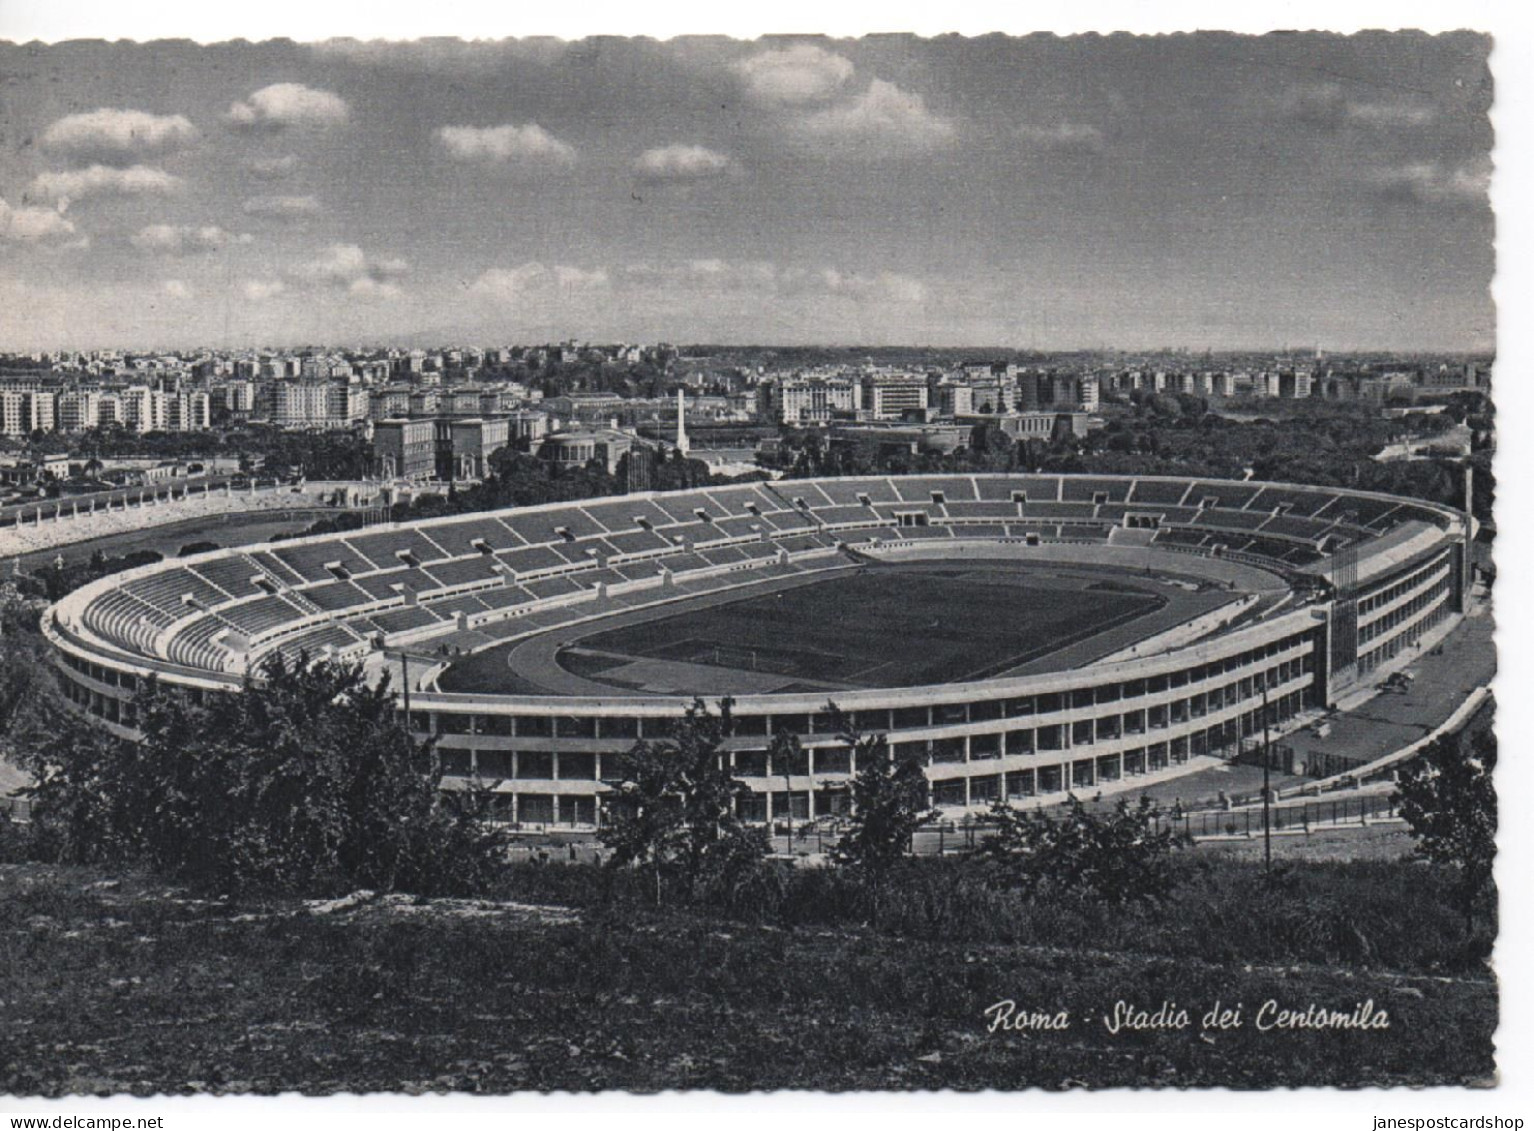 THE STADIUM OF HUNDRED THOUSAND SPECTATORS - LARGER SIZED POSTCARD - UNPOSTED - IN GOOD CONDITION - 1950's ? - Stades & Structures Sportives